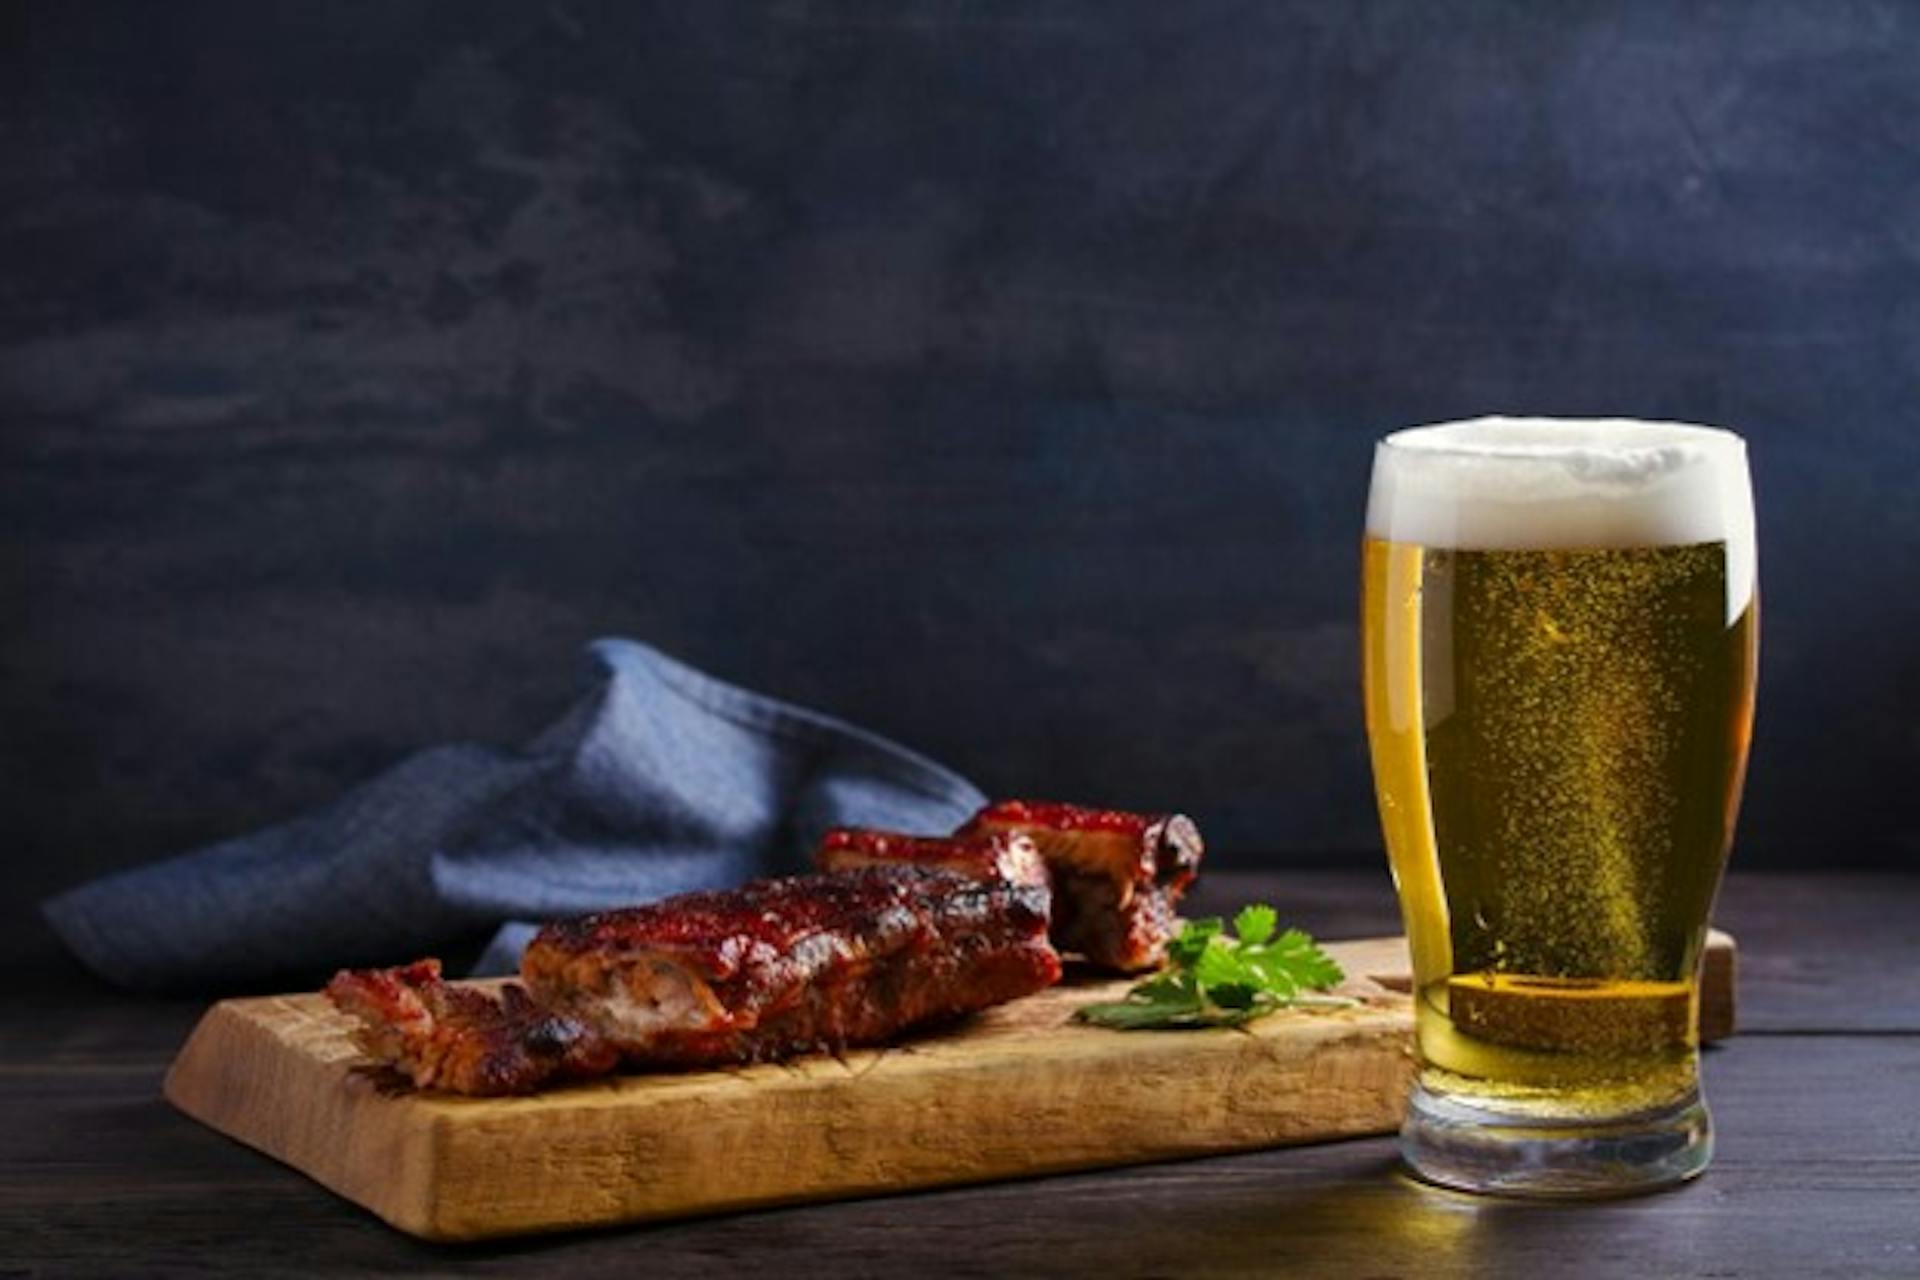 A serving of BBQ ribs accompanied by a light beer